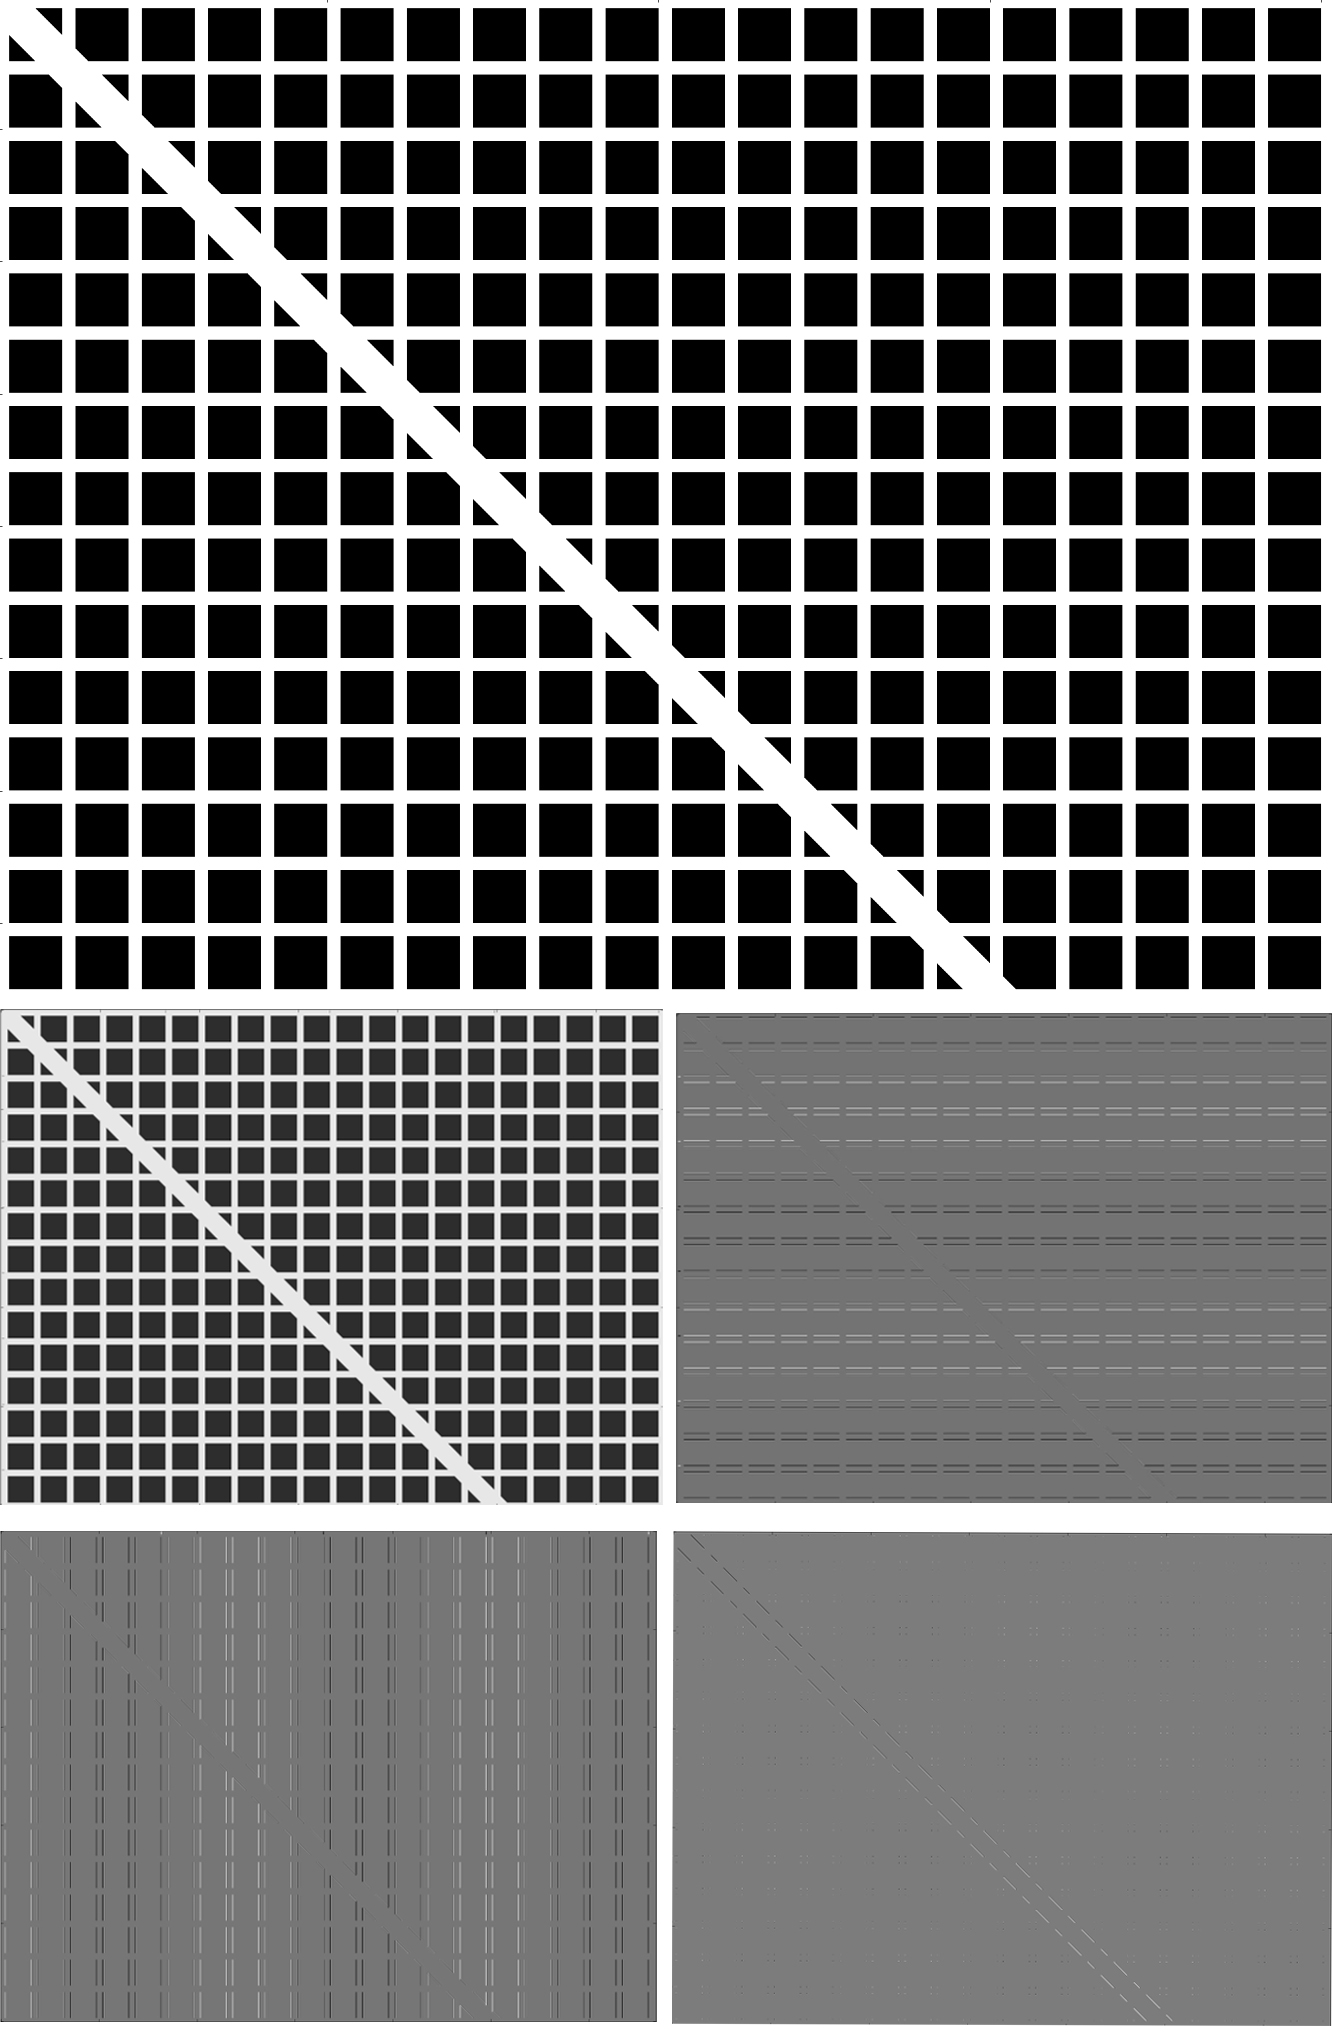 The original image (top, 996×1332 pixels) is transformed using function into the four coefficient (approximation, horizontal, vertical and diagonal) matrices (501×669) displayed below the original. The transformation was performed using the Daubechies wavelet with four vanishing moments and half-point end extension. Note that the approximation coefficients are a very close representation of the original image, while the horizontal, vertical and diagonal features of the image are visible in the respective coefficient matrices.